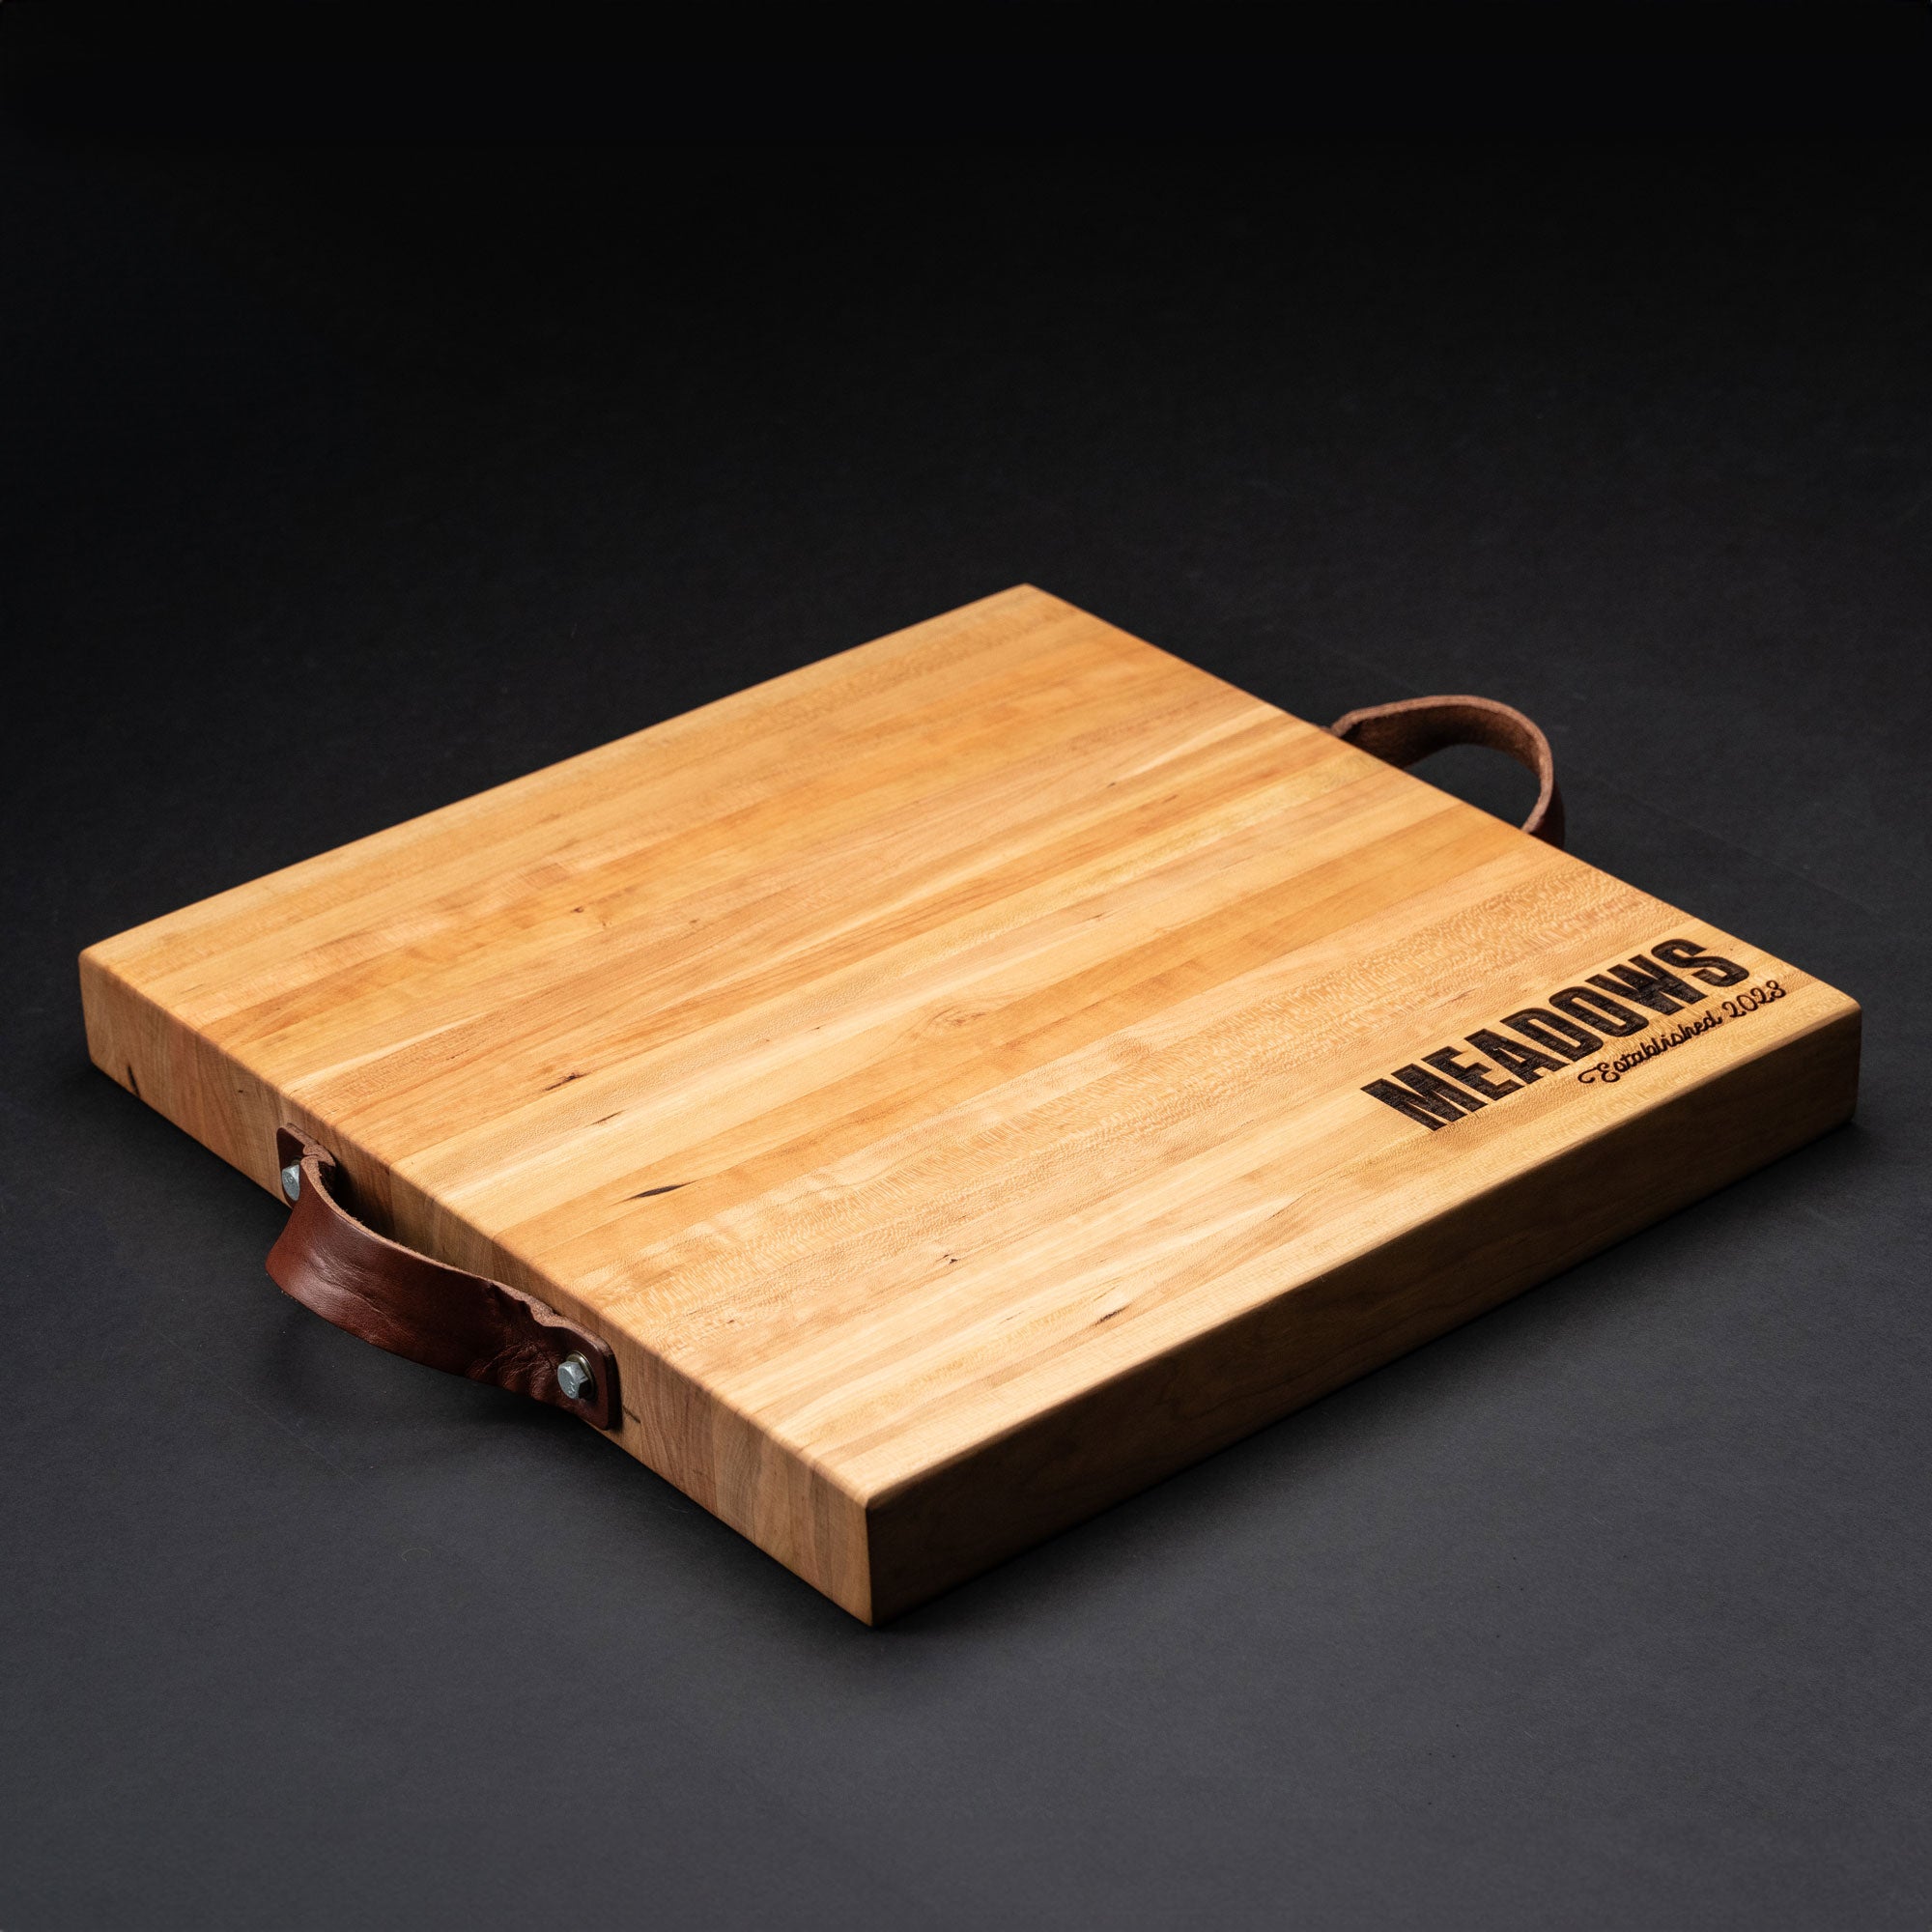 American Cherry Wood Butcher Block Cutting Board, Medium - 17in x 17in / Remove Handles (-$5.00)at Holtz Leather